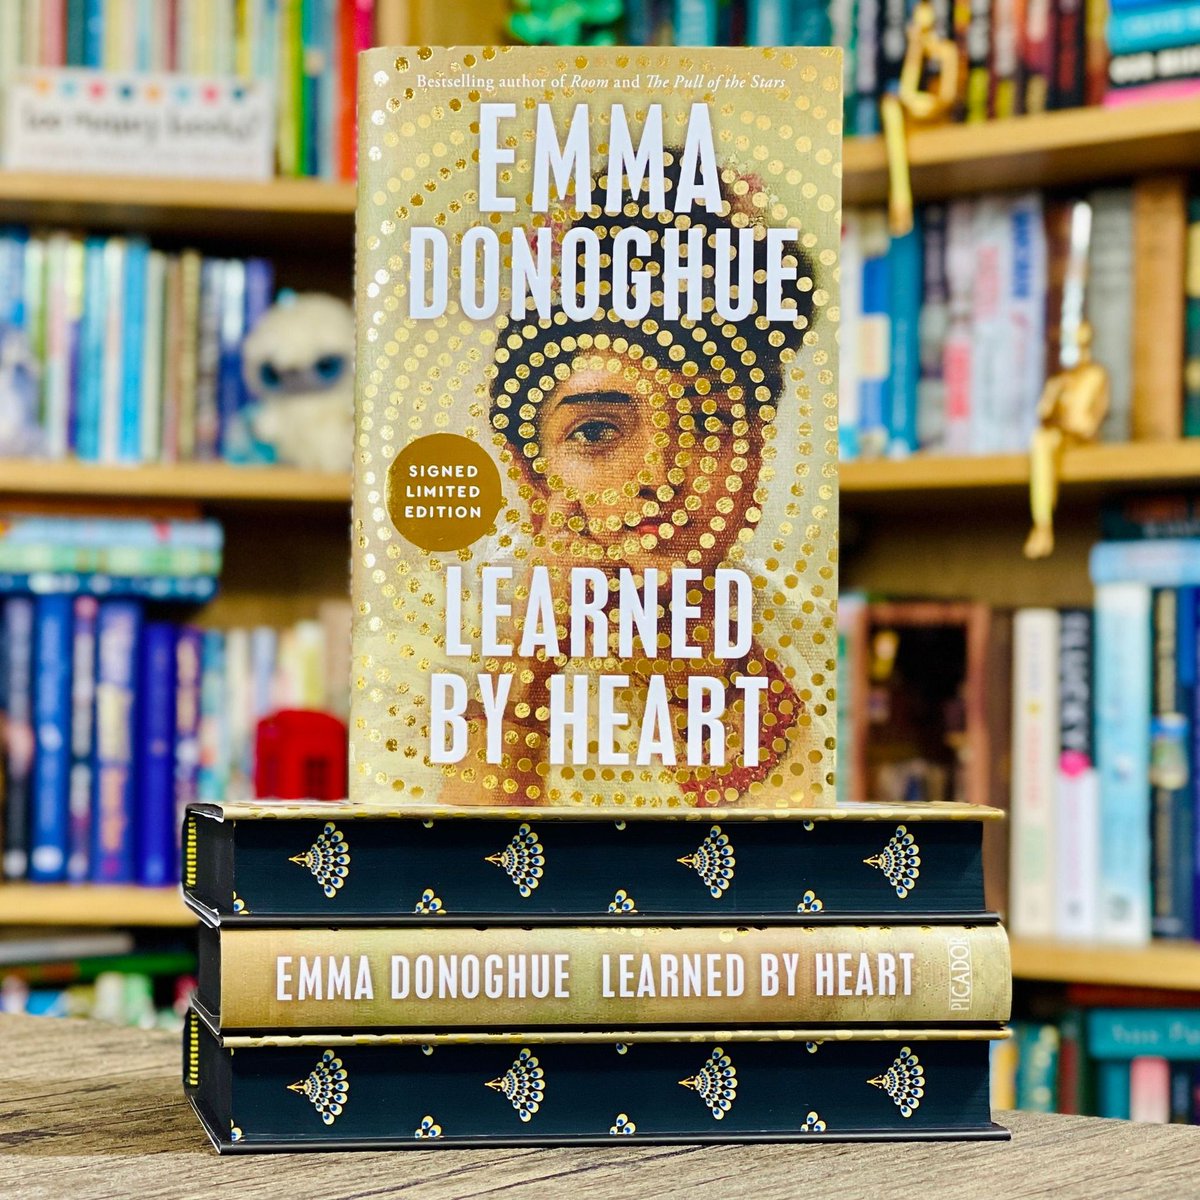 Out in the world today! Emma Donoghue's latest novel - sprayed edges, signed copy, 1st edition hardback! #LearnedByHeart, tells the heartbreaking story of the tangled lives of two women whose intense, and unlikely, relationship will change them for ever. tealeavesandreads.co.uk/product/learne…